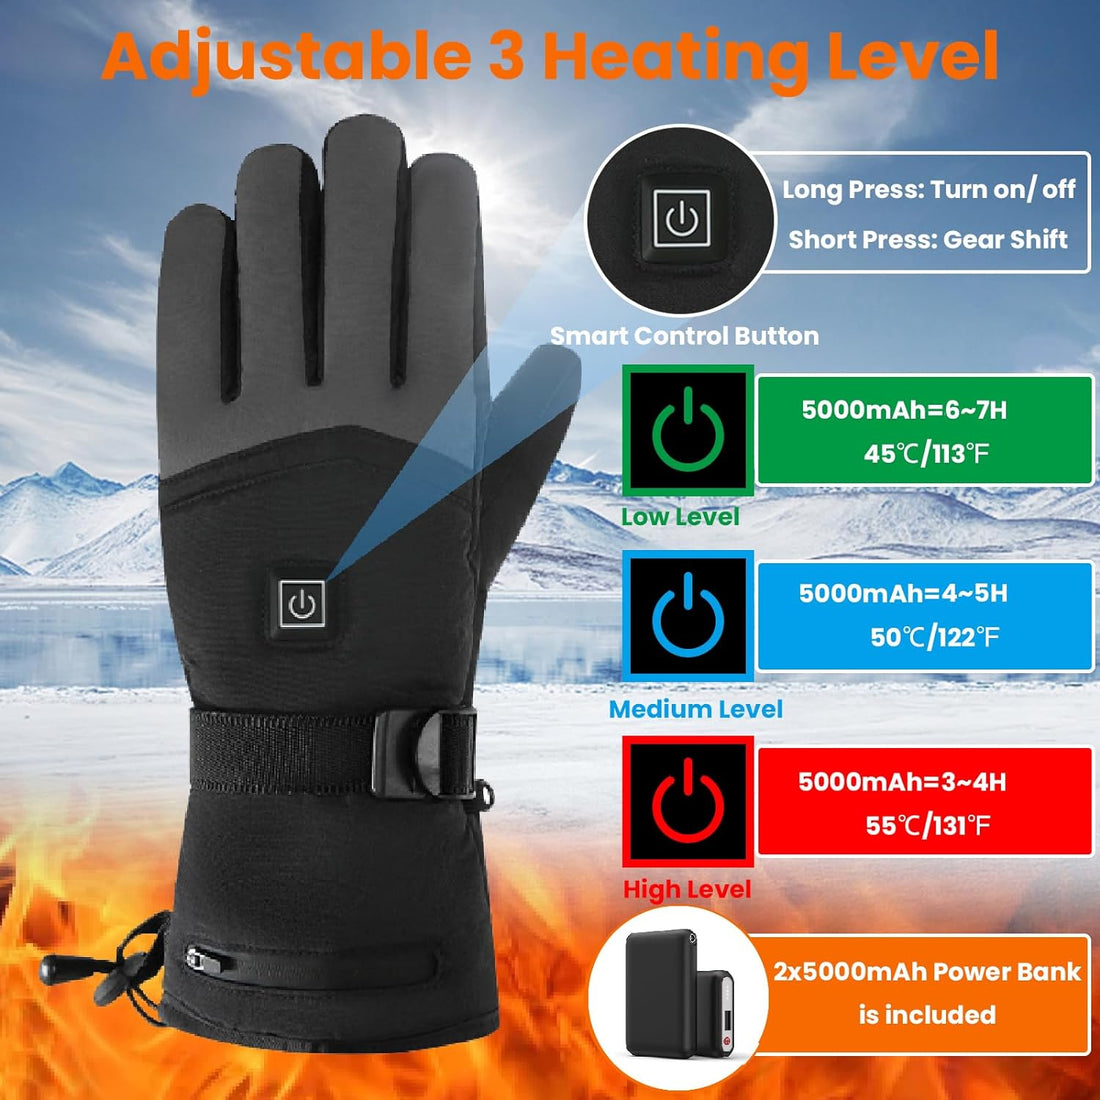 Heated Gloves for Men Women, 3-Heating Level USB Rechargeable Heated Gloves, 2 * 5v 5000mAh Battery Waterproof Electric Heated Gloves for Winter Riding Skiing Motorcycling Hunting, Universal Size